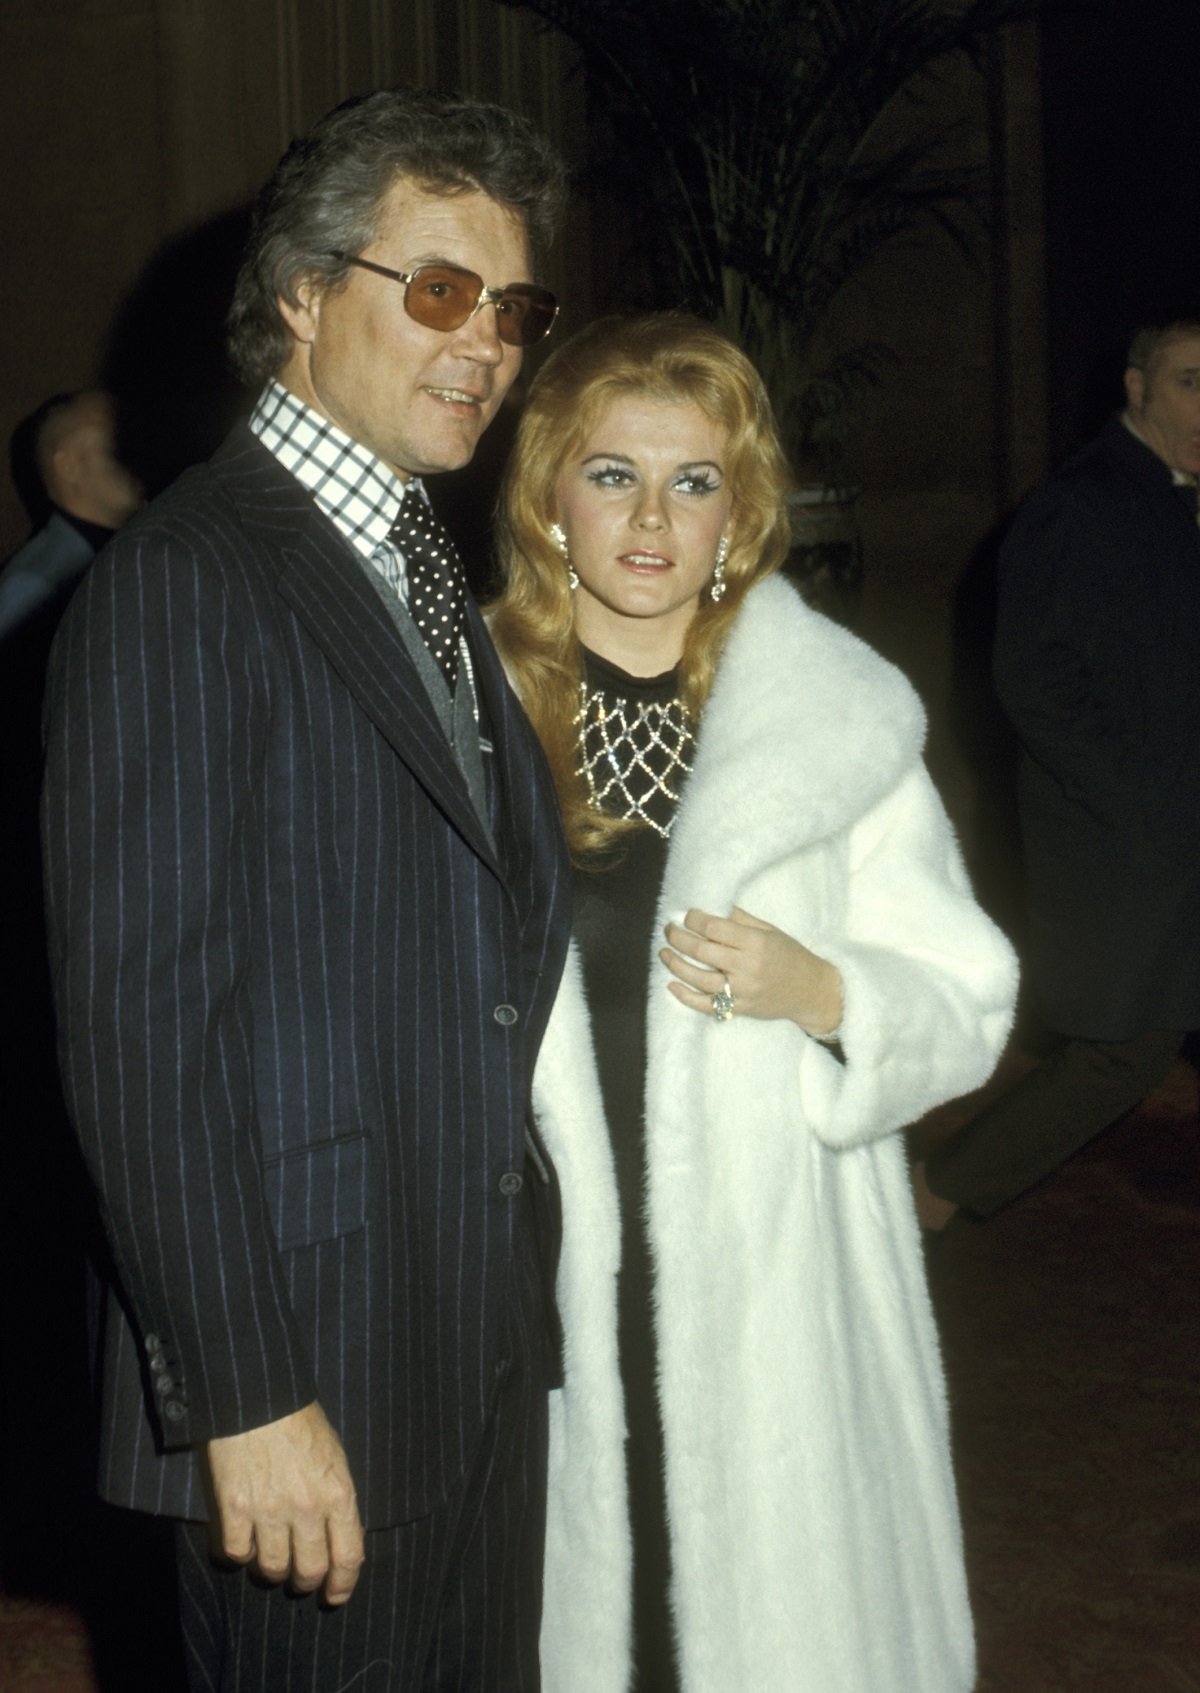 Ann-Margret and her husband Roger Smith in a candid shot at a 1971 event at the Waldorf-Astoria